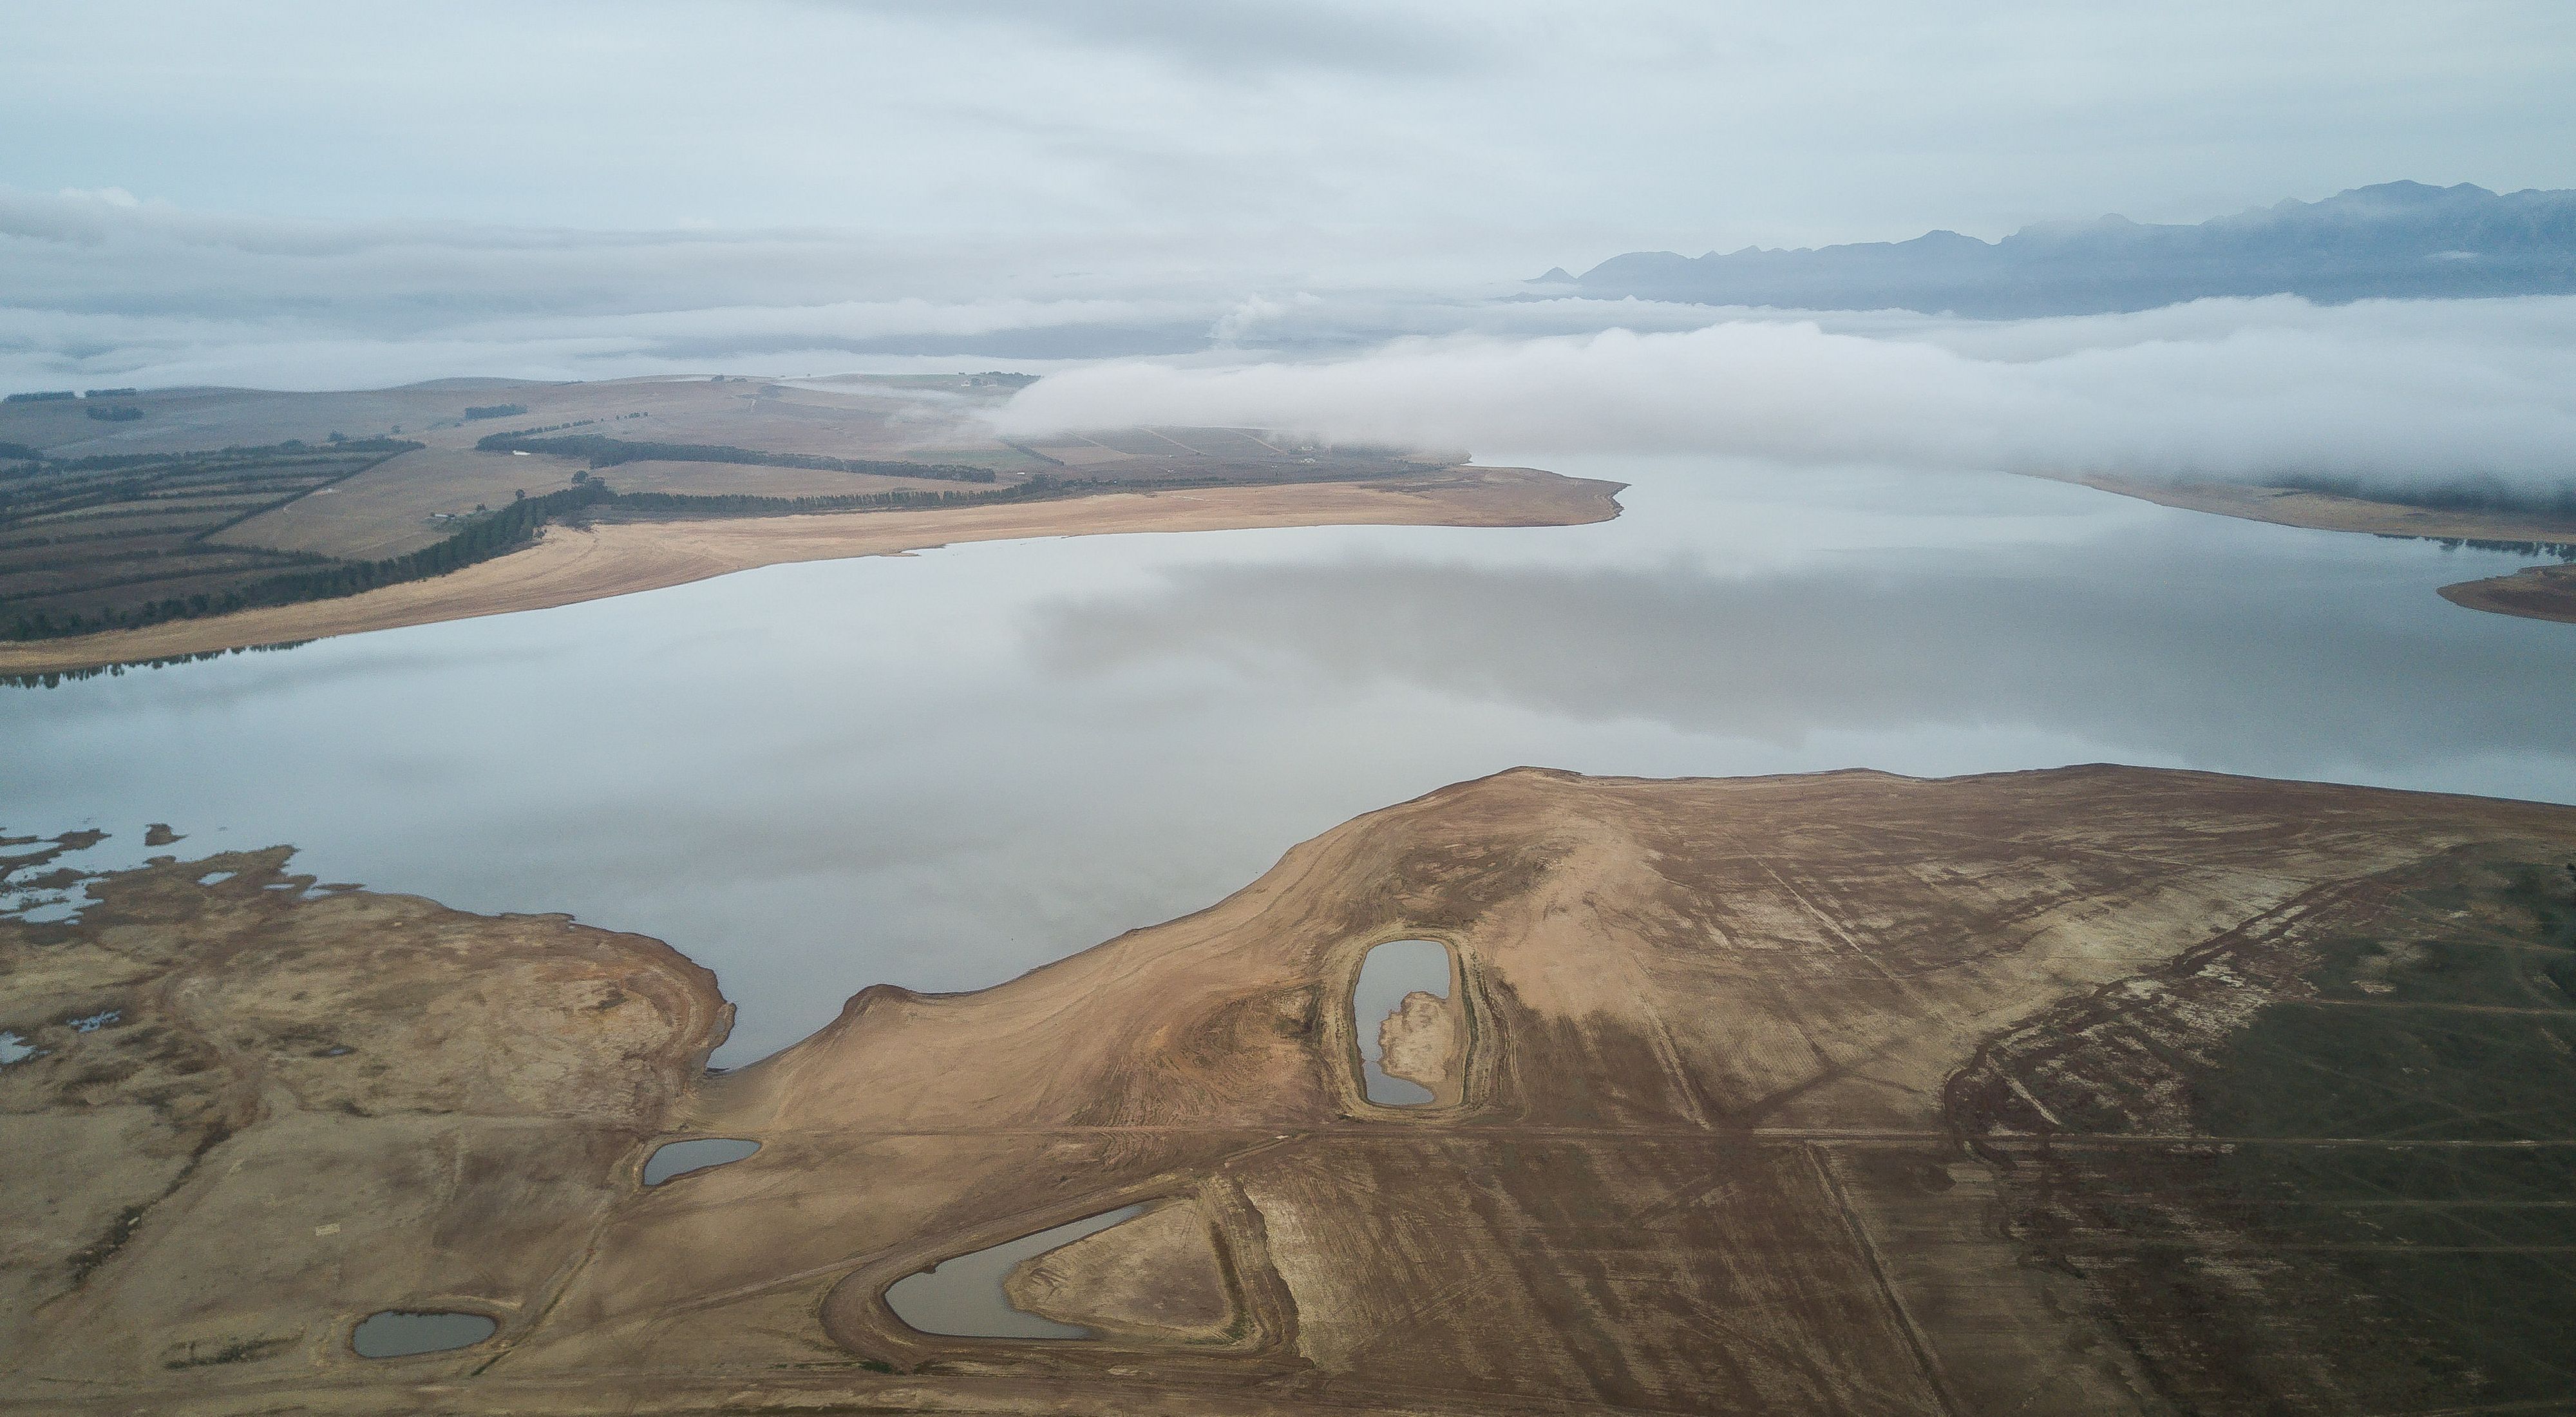 A severe drought in 2017 and 2018 depleted Cape Town's water supplies.